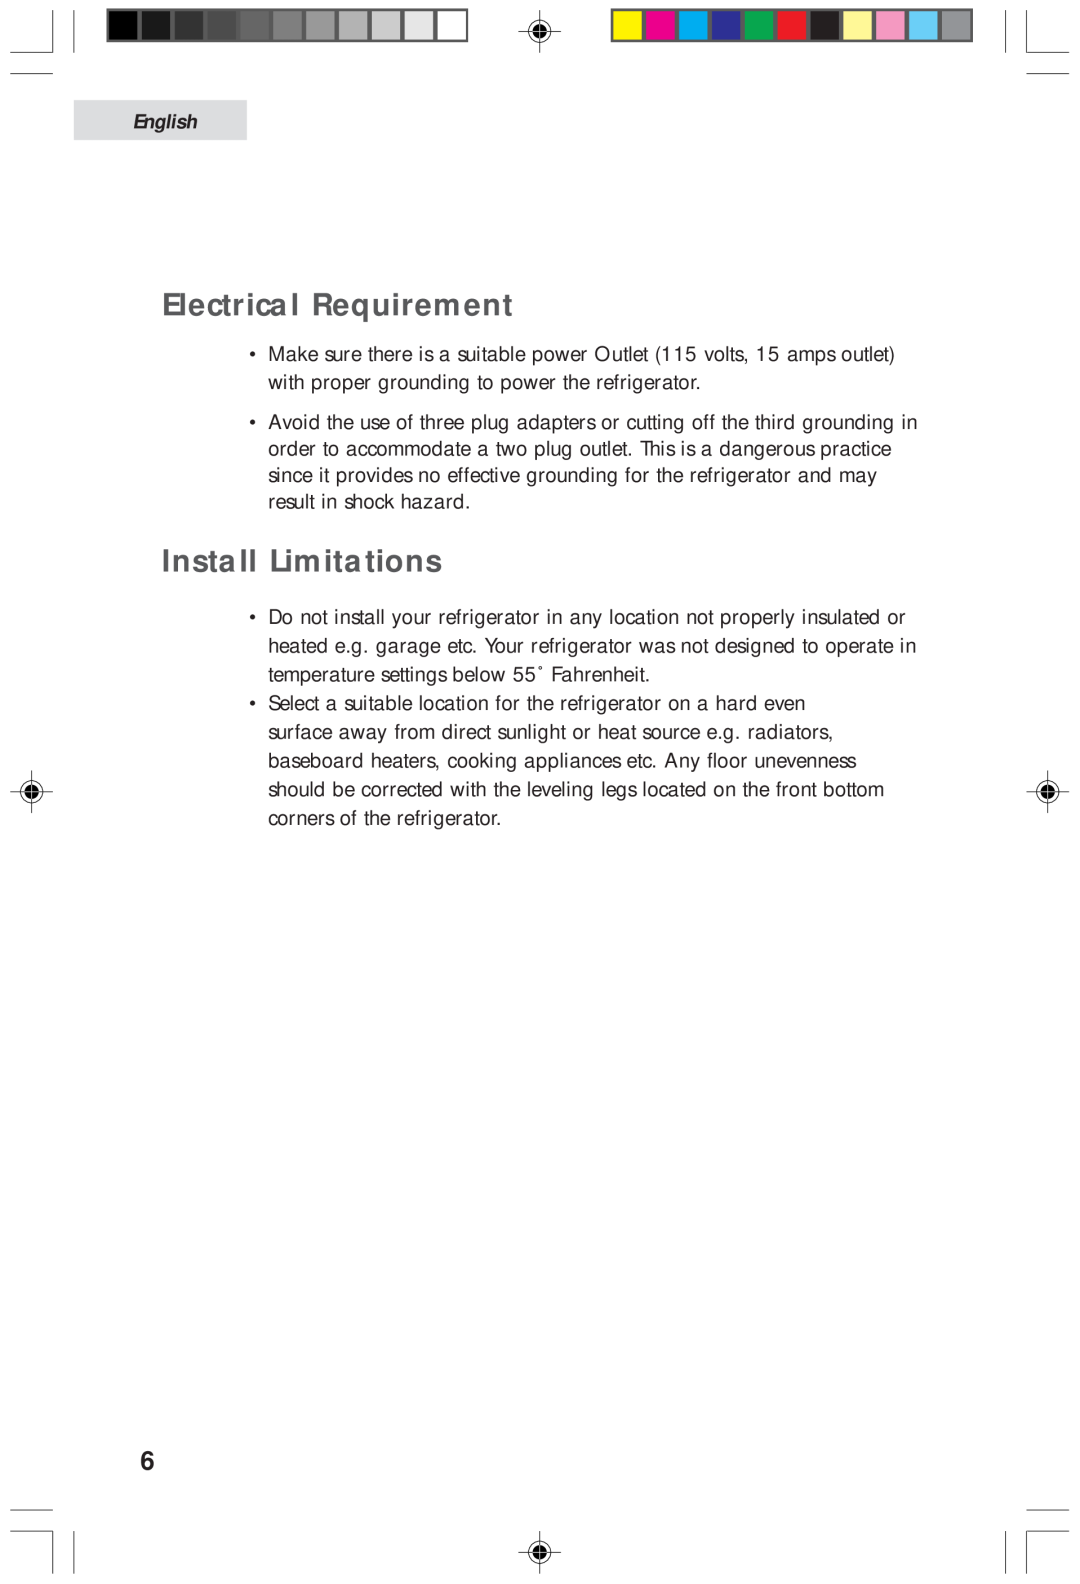 Haier HDF05WNAWW user manual Electrical Requirement, Install Limitations, English 